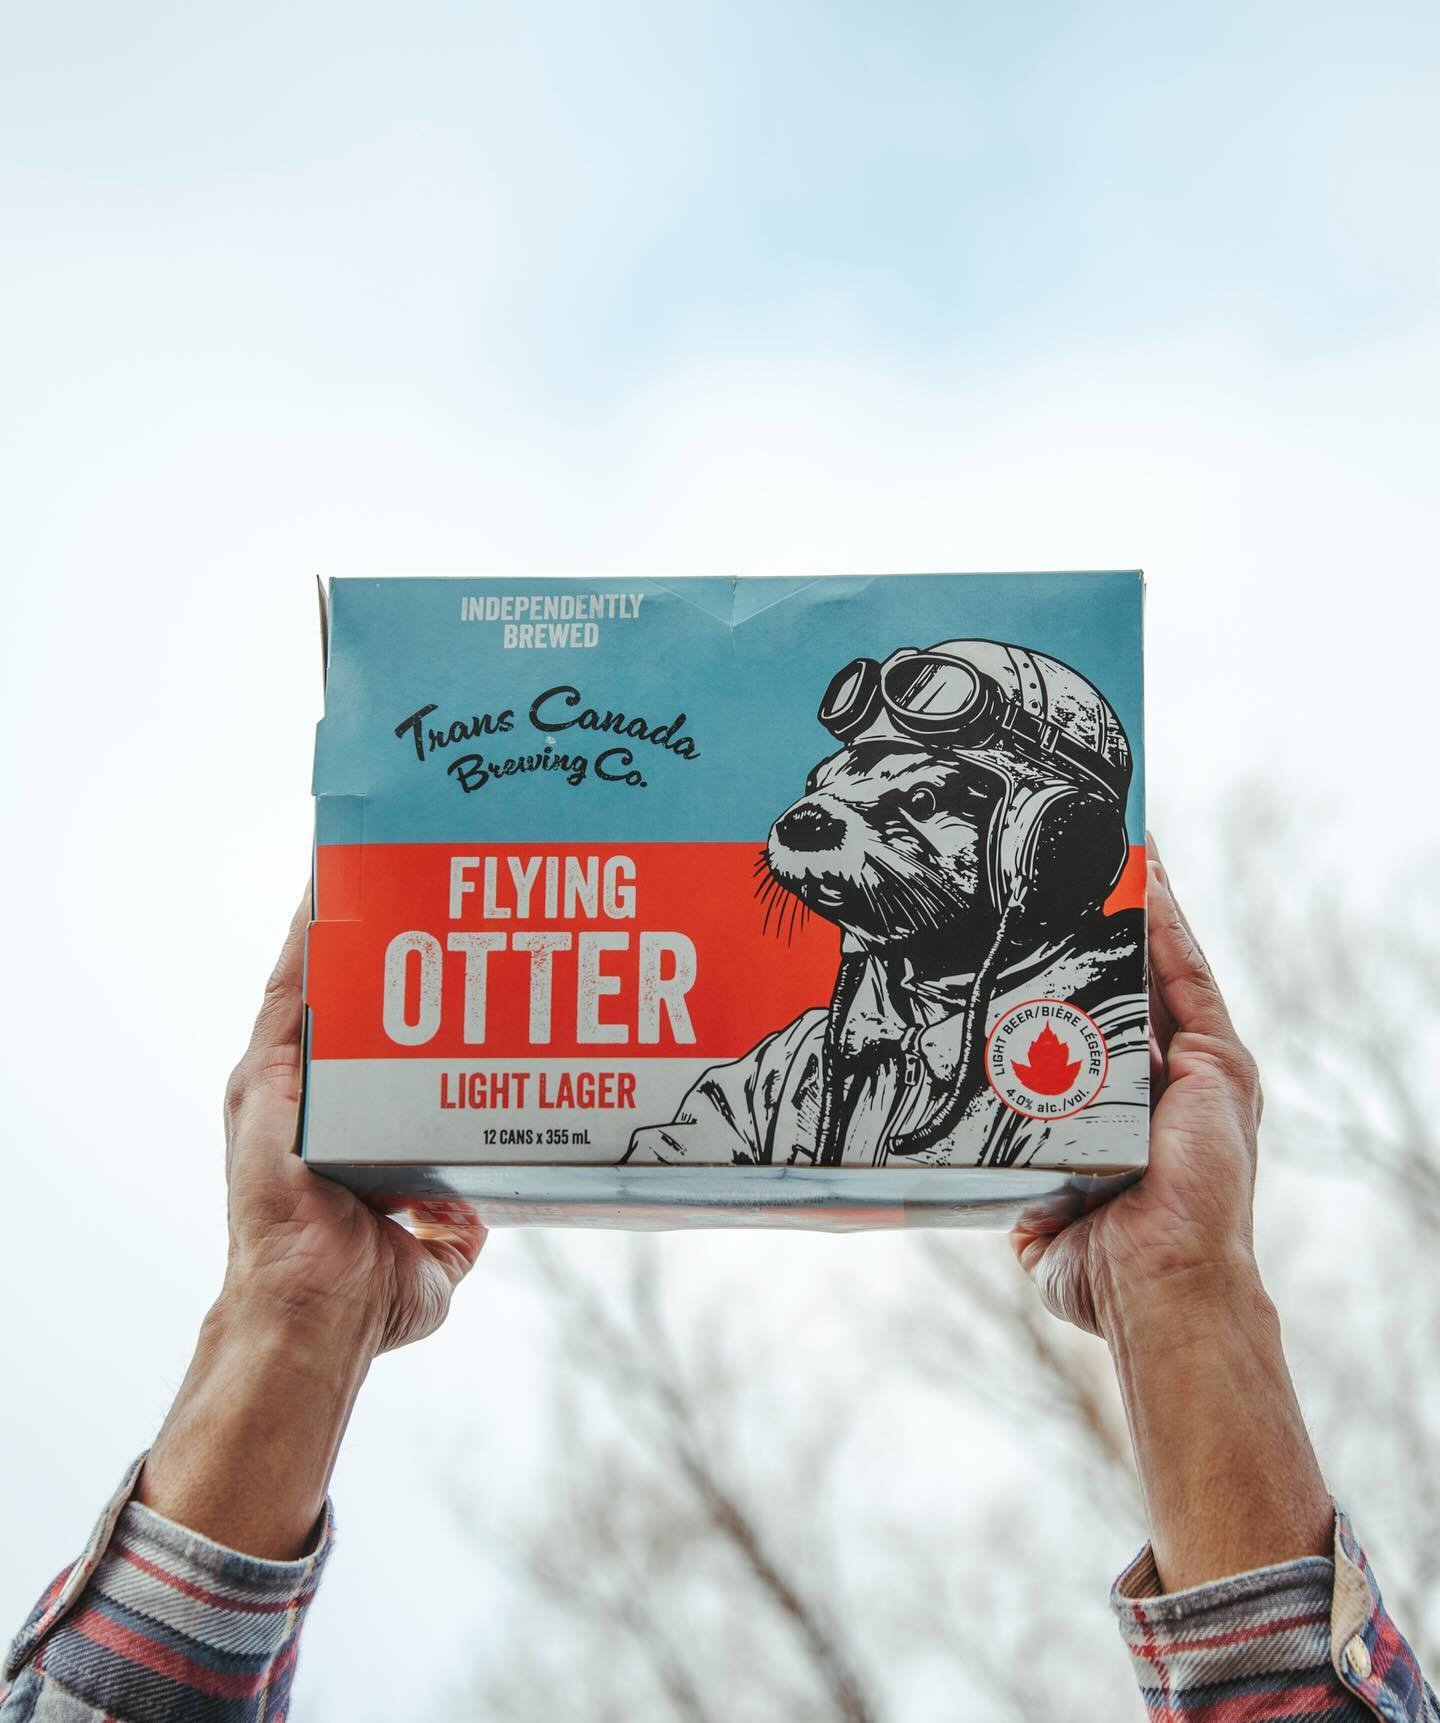 Limited Time Offer!

Flying Otter Light Lager is on sale in all vendors, LCs, and in our General Store for the entire month of May!

355 ml 12-packs: $19.94 (save $5.00)
473 ml cans: $2.94 (save $0.50)